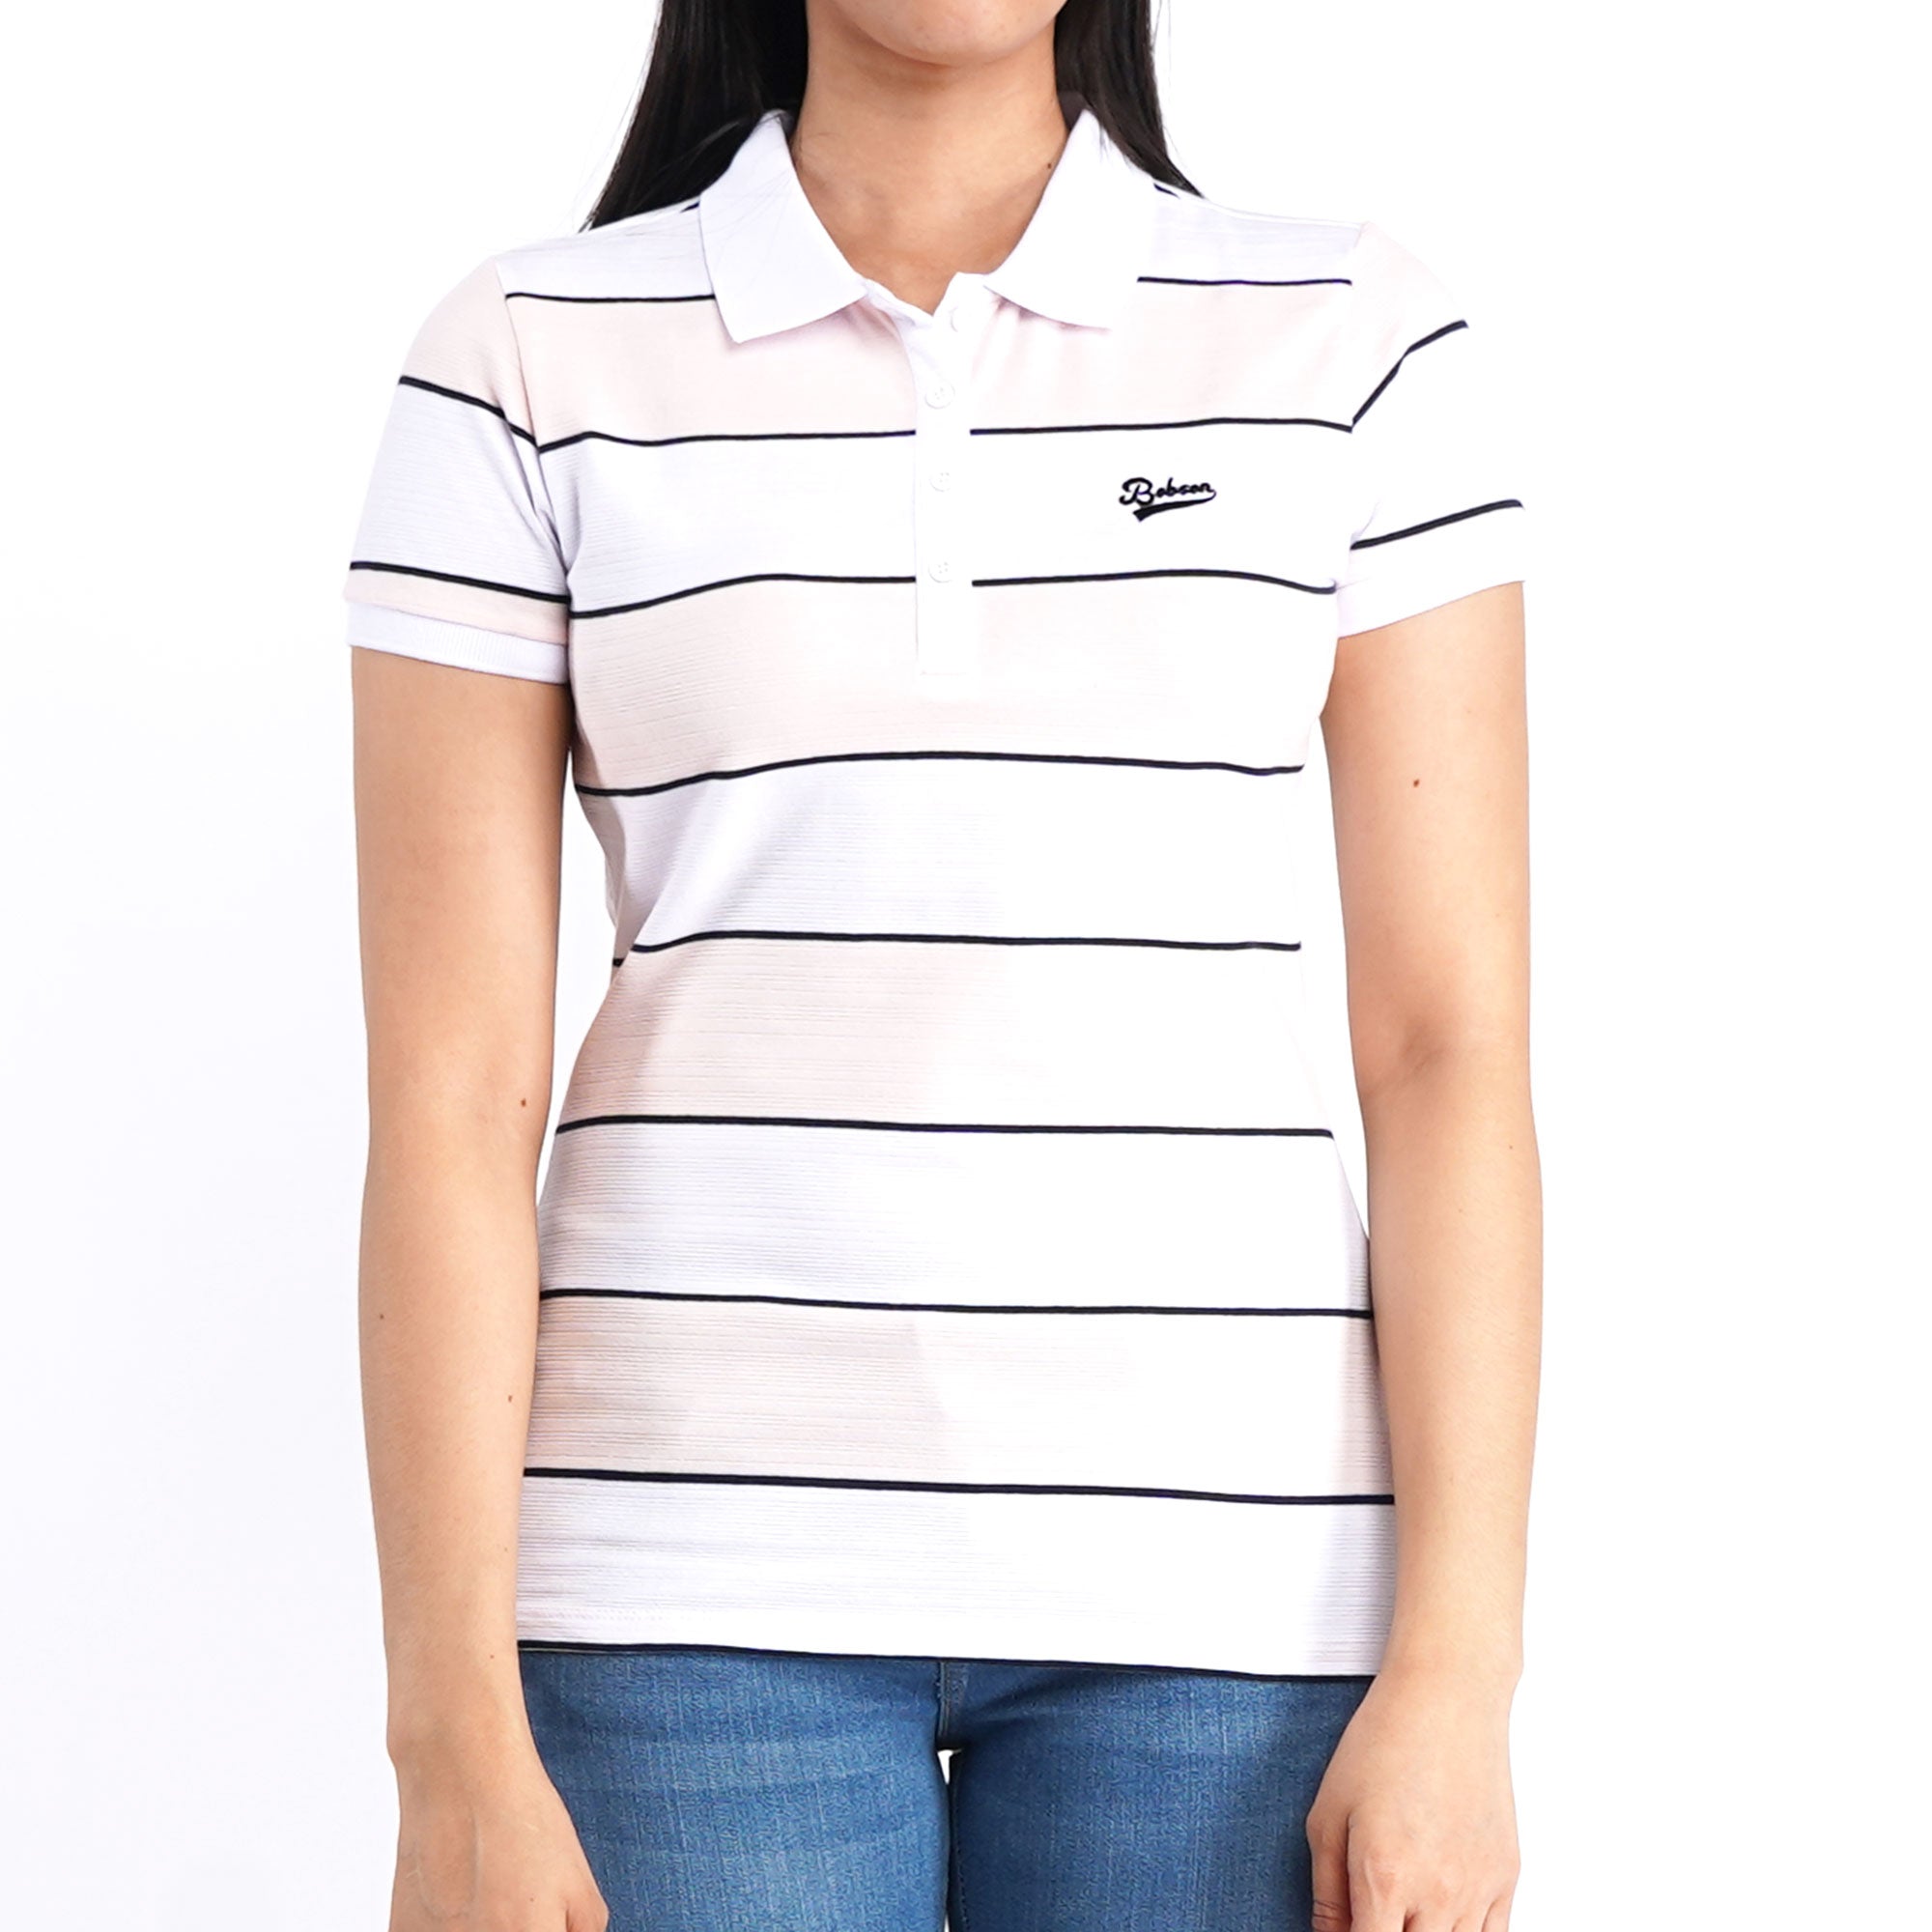 Bobson Japanese Ladies Basic Striped Polo shirt for Women Missed Lycra Fabric Trendy Fashion High Quality Apparel Comfortable Casual Collared shirt Regular Fit 136106 (Potpourri)